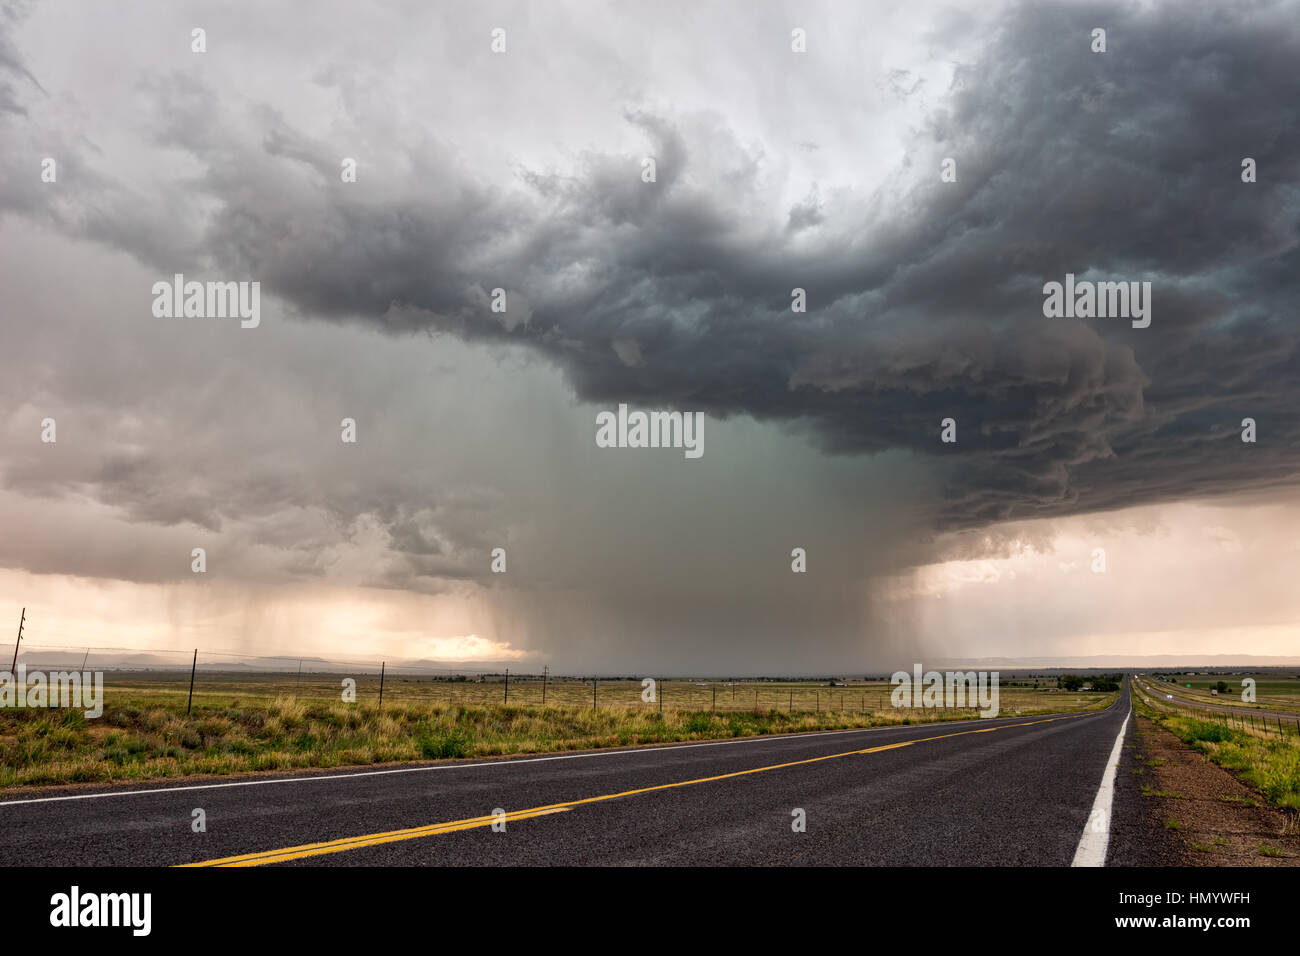 Thunderstorm with dark clouds and heavy rain near Springer, New Mexico Stock Photo